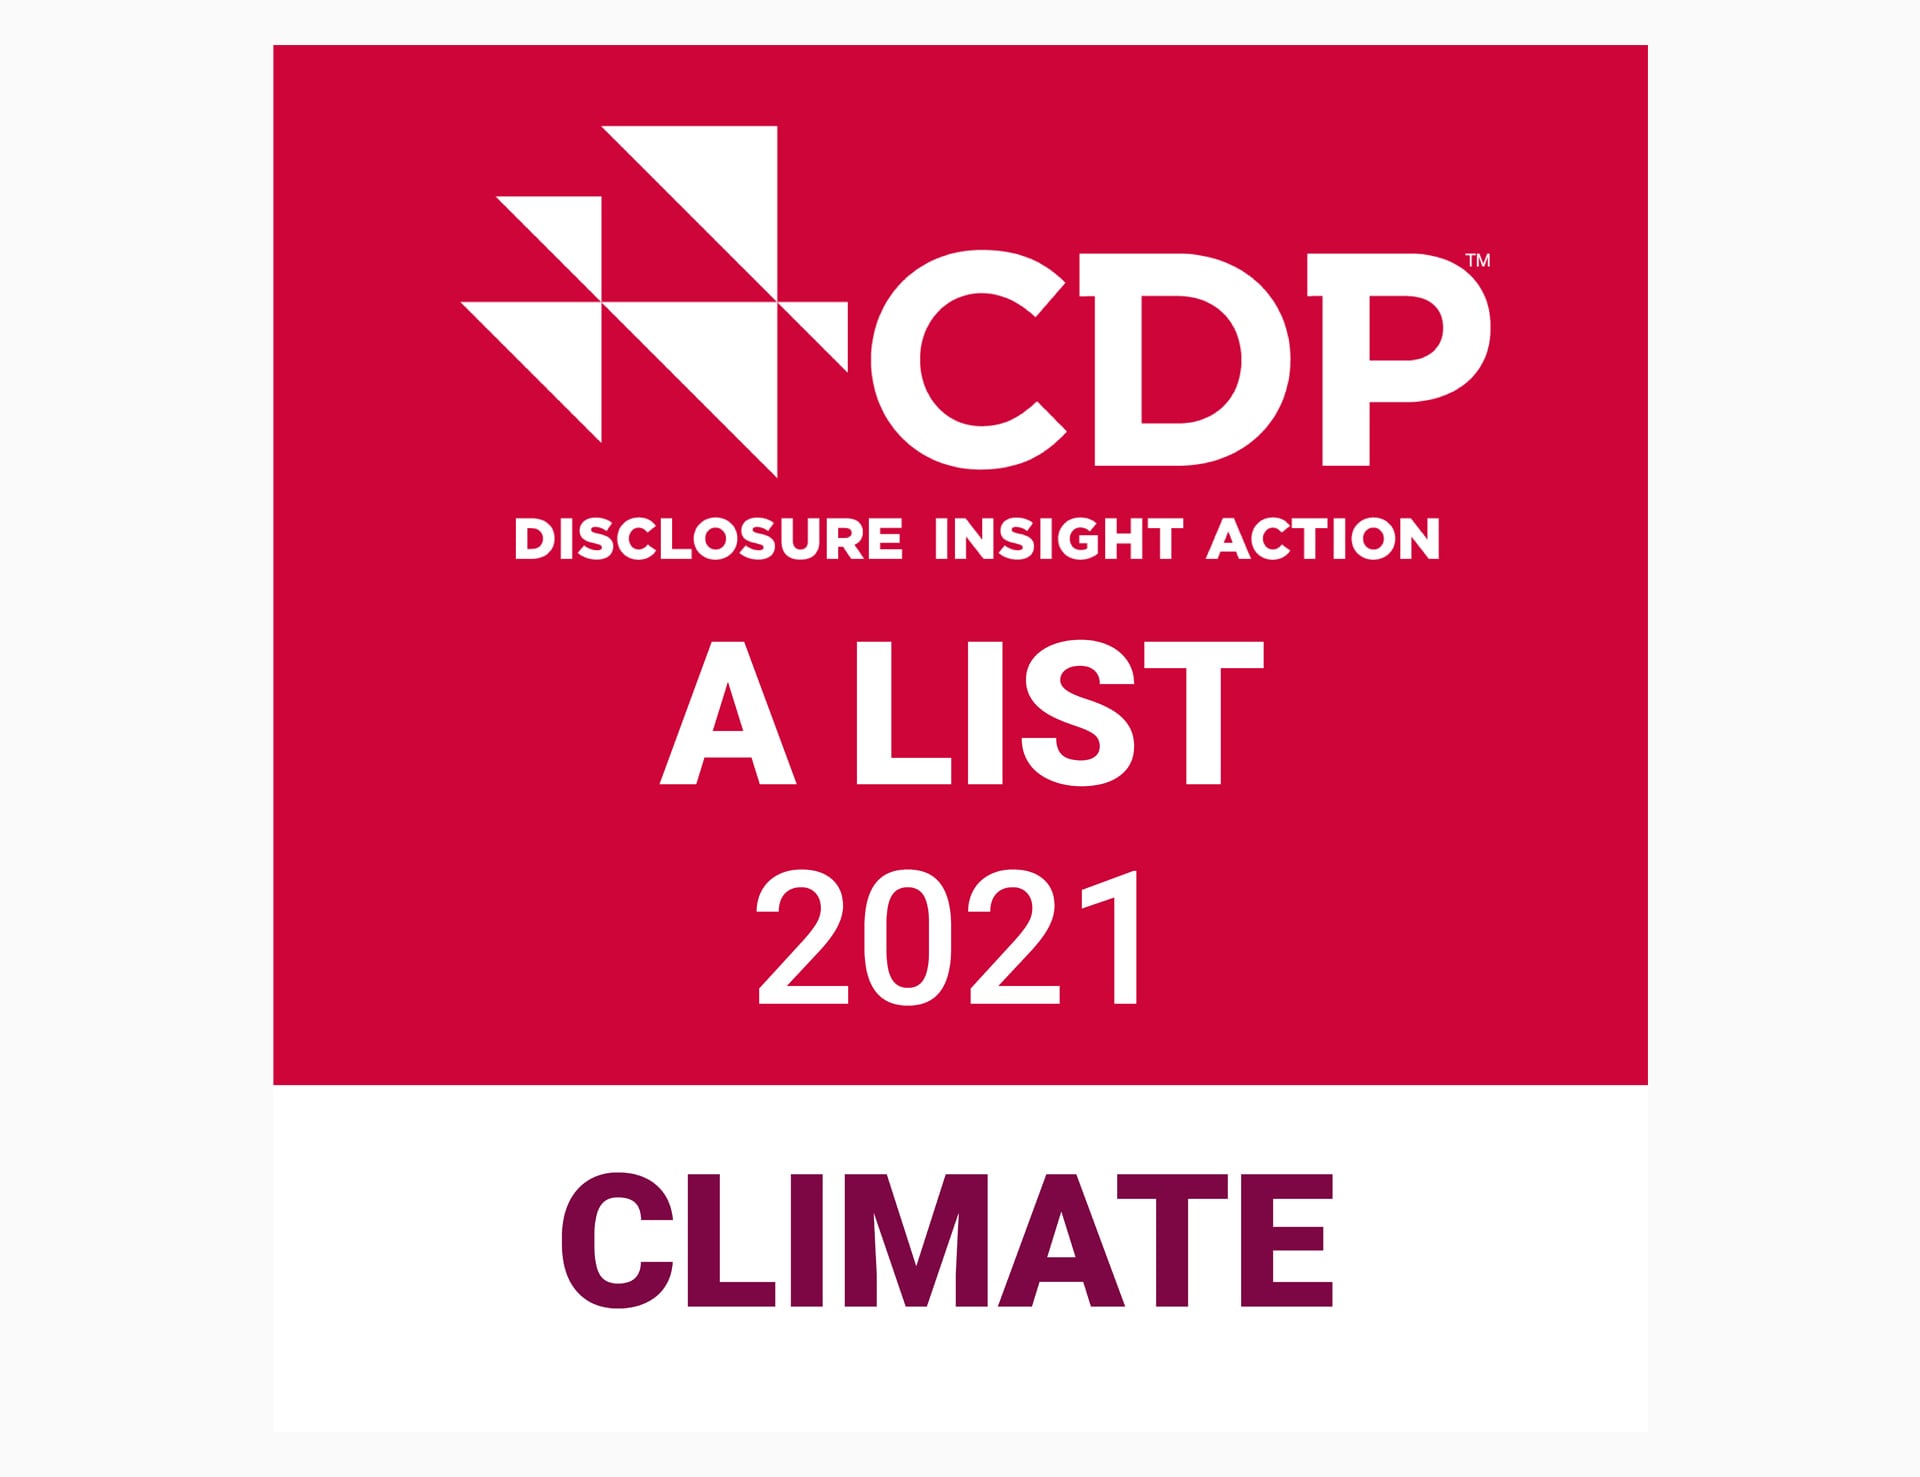 A logo of CDP disclosure insight action A list 2021